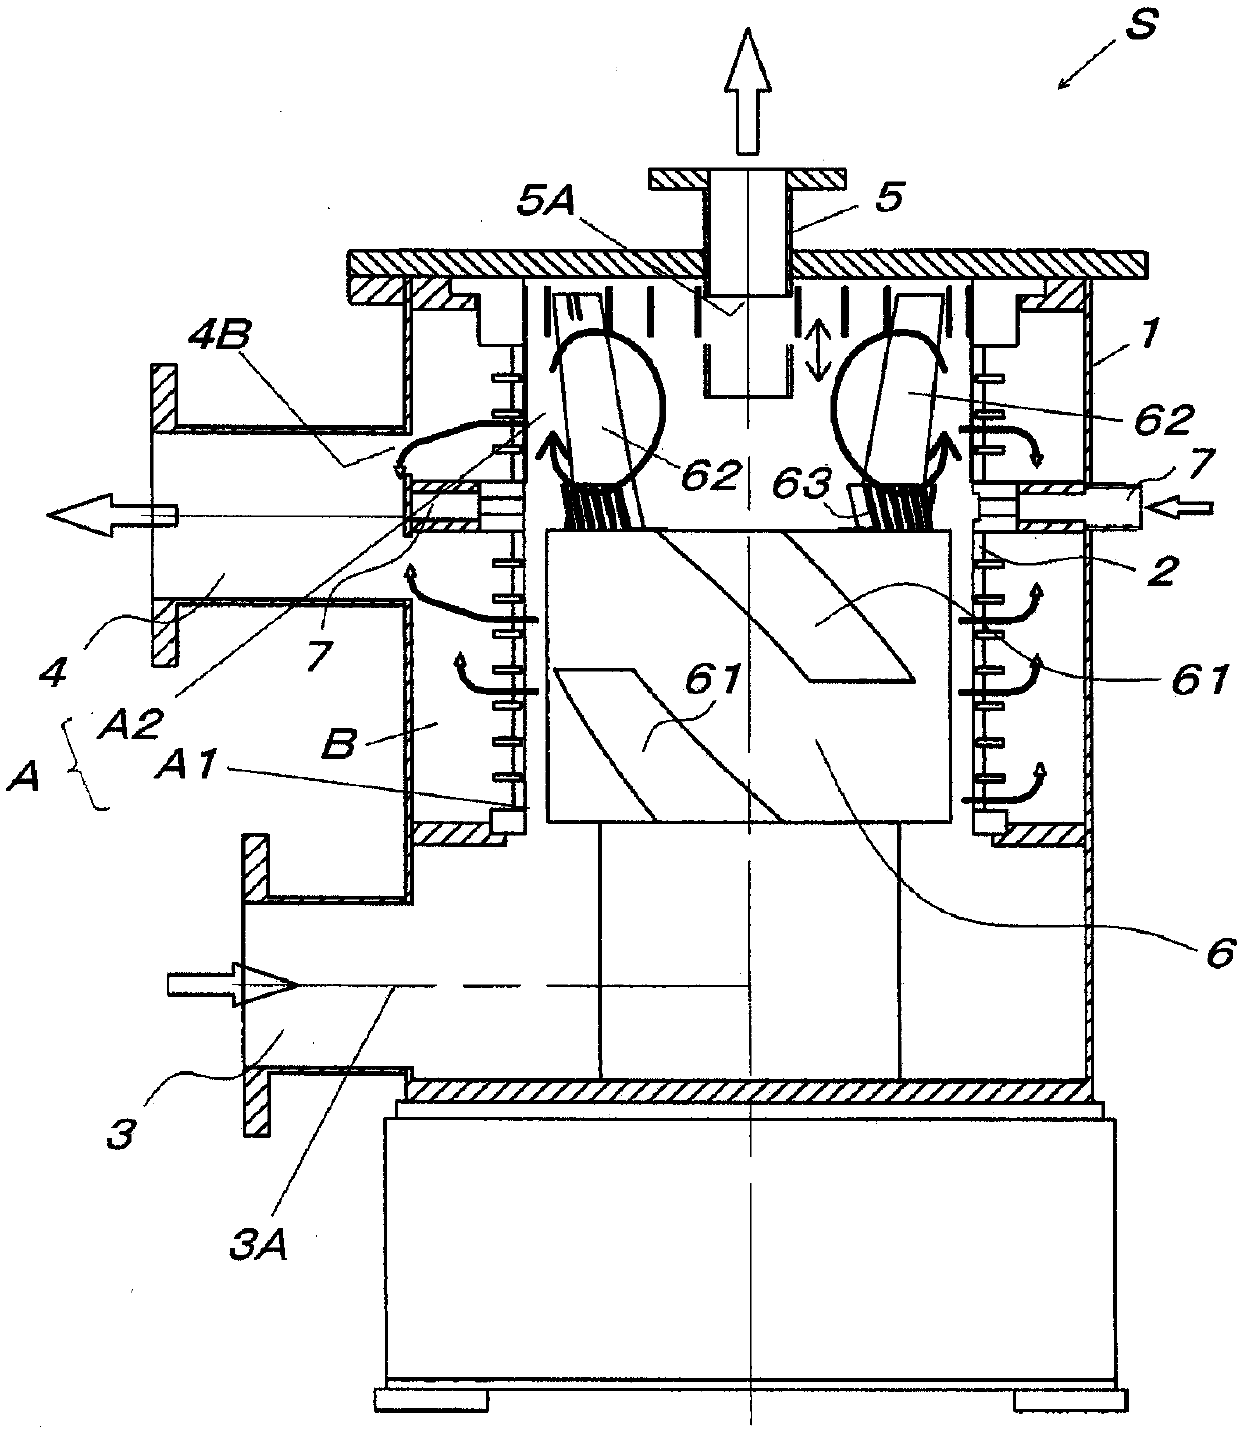 Screening device for paper making